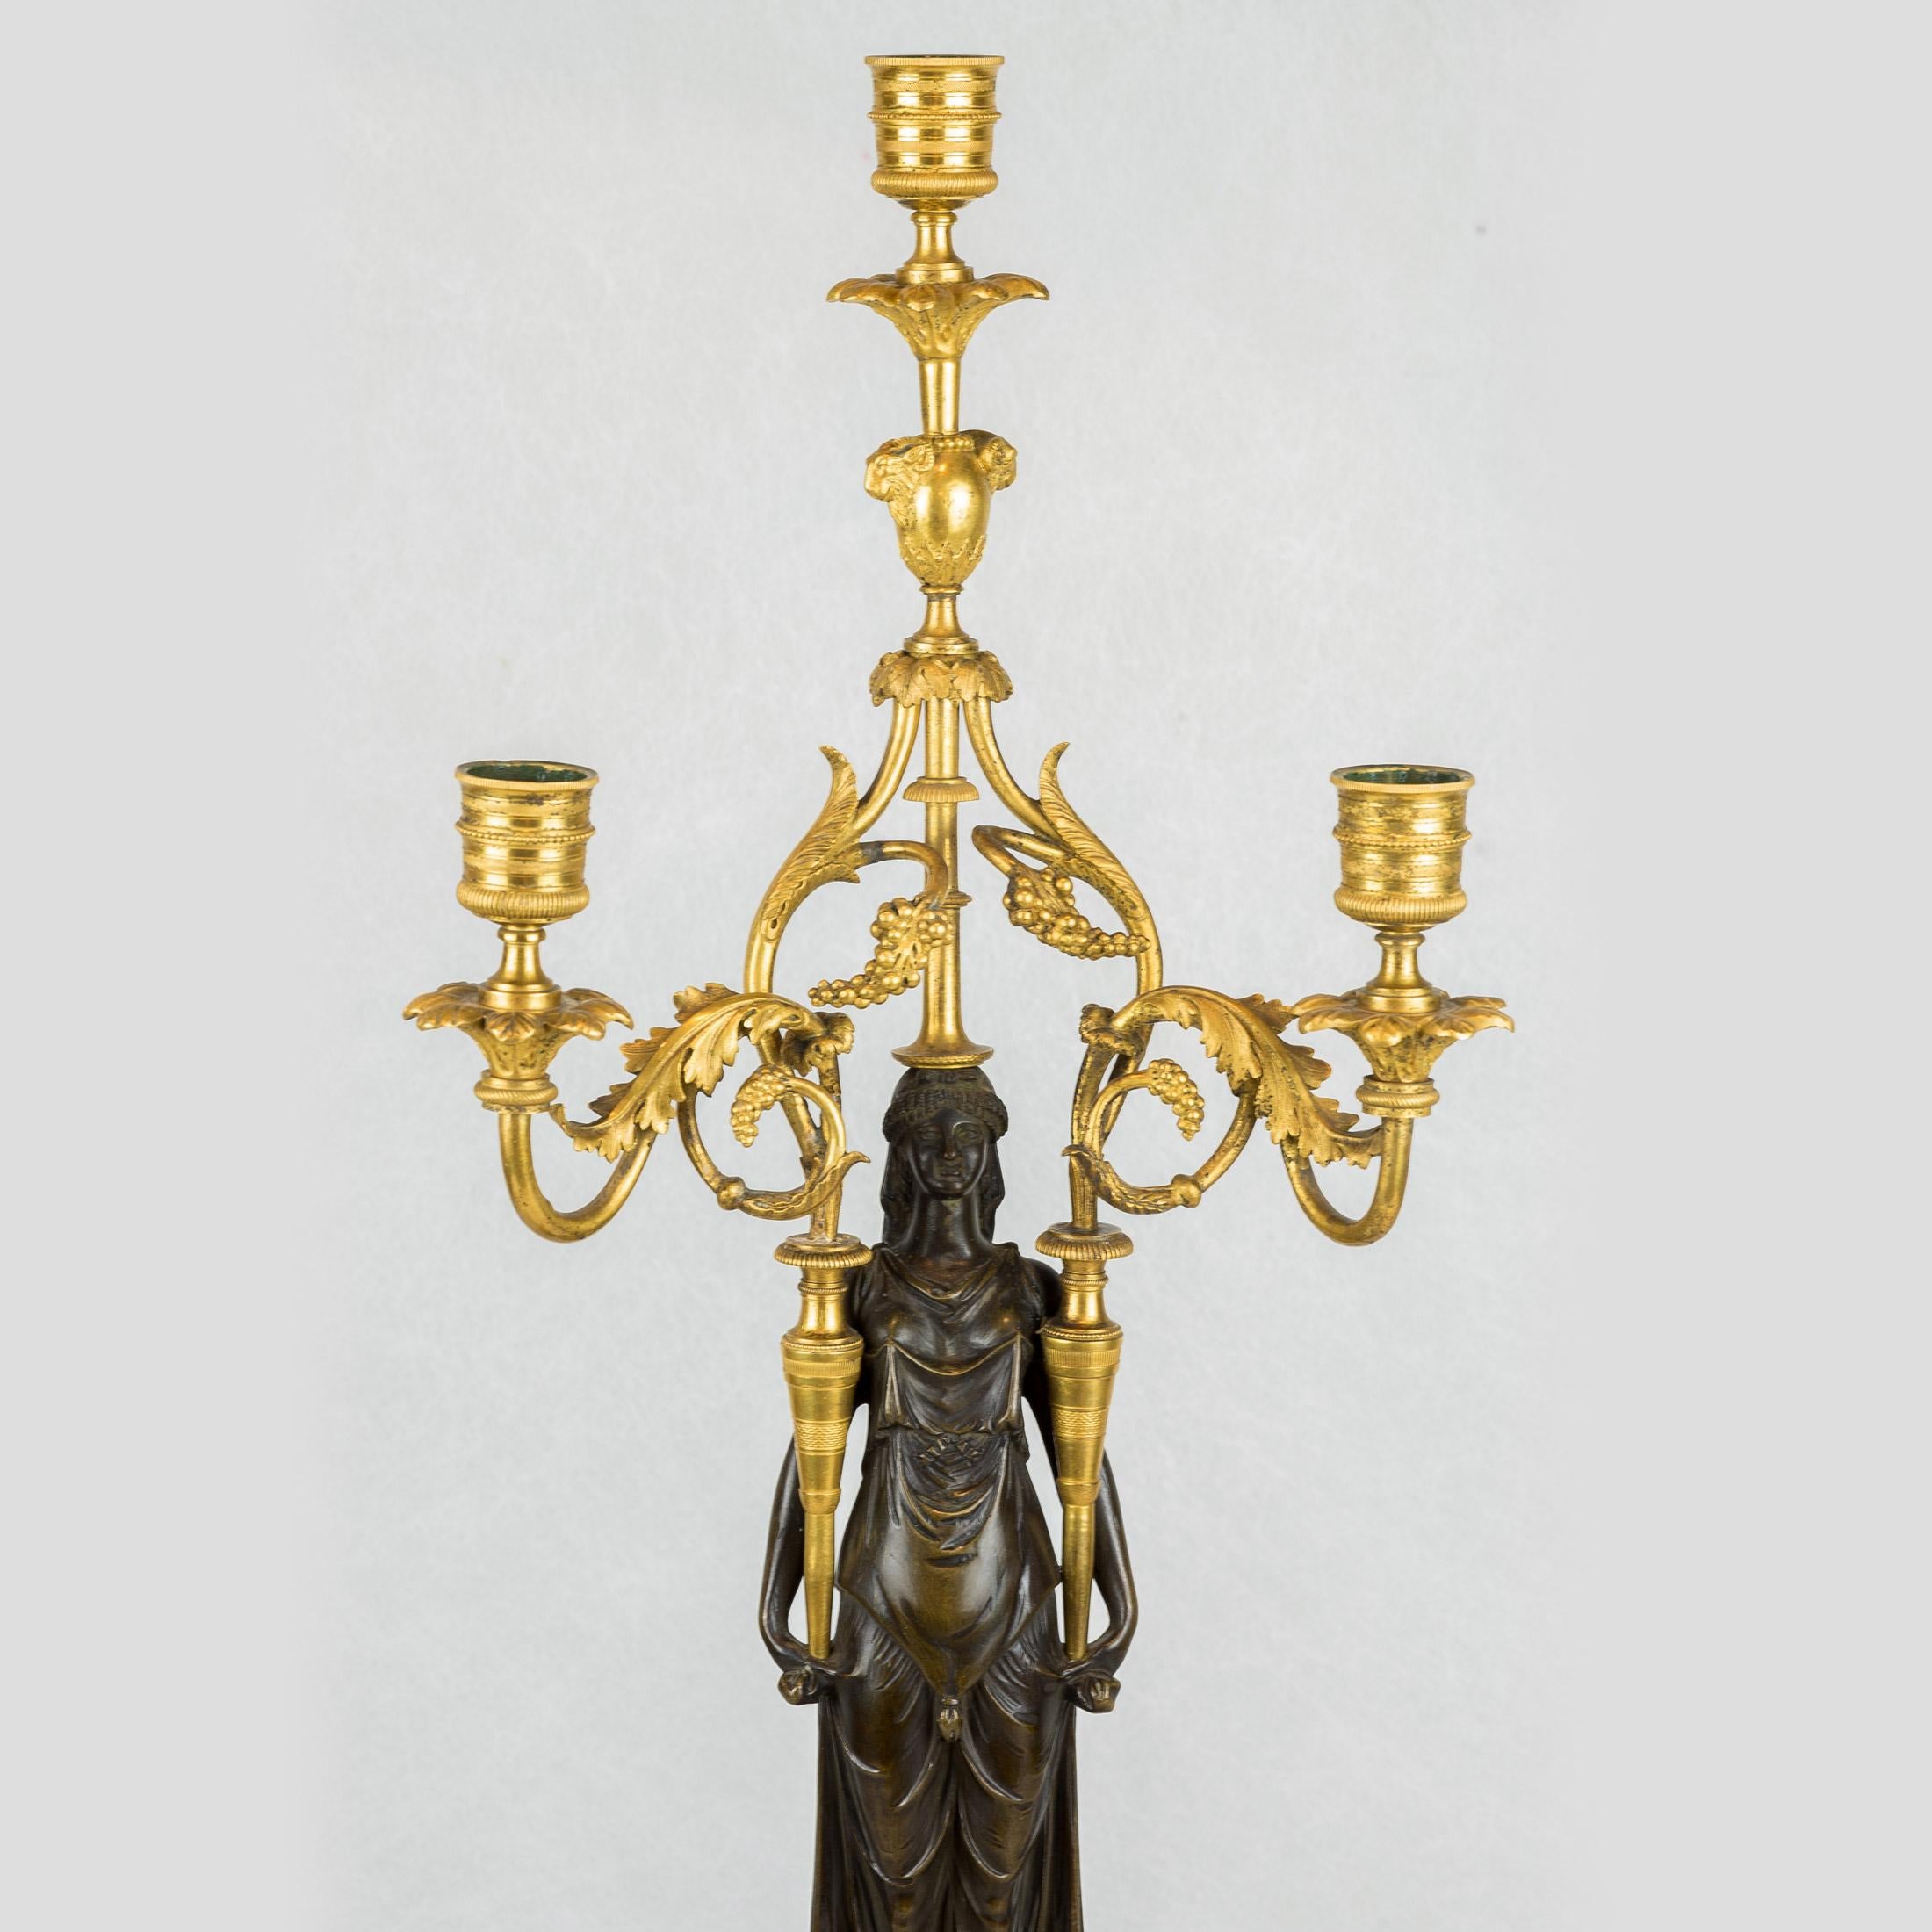 19th Century Fine Quality Pair of Patinated and Gilt-Bronze and Marble Three-Light Candelabra For Sale